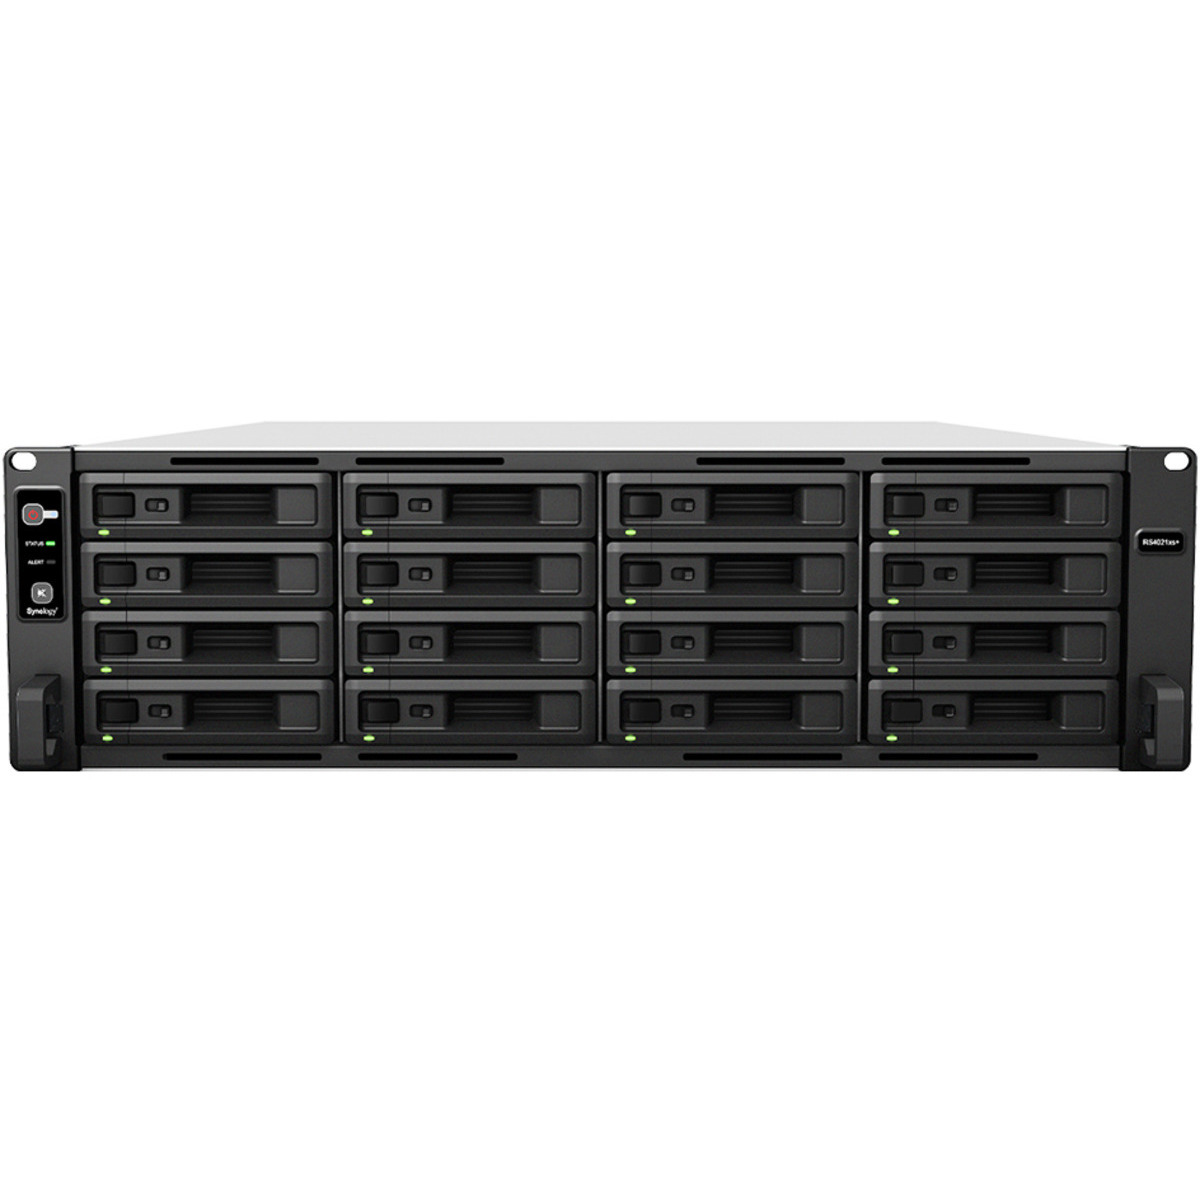 buy Synology RackStation RS4021xs+ 128tb RackMount NAS - Network Attached Storage Device 16x8000gb Samsung 870 QVO MZ-77Q8T0 2.5 560/530MB/s SATA 6Gb/s SSD CONSUMER Class Drives Installed - Burn-In Tested - nas headquarters buy network attached storage server device das new raid-5 free shipping simply usa christmas holiday black friday cyber monday week sale happening now! RackStation RS4021xs+